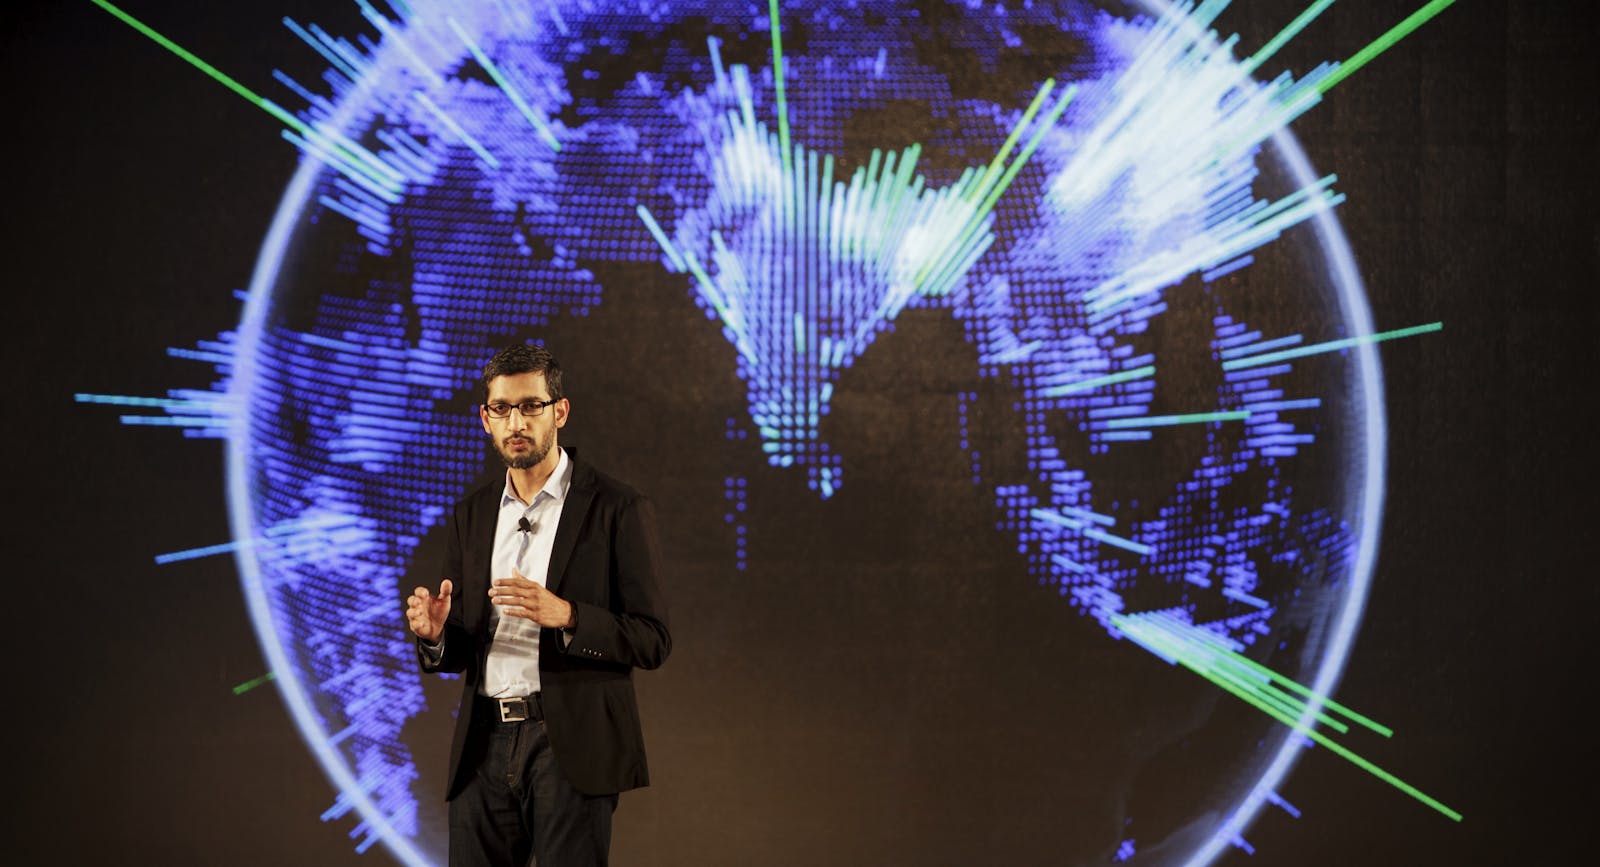 Google's Sundar Pichai, who oversees Android. Photo by Bloomberg.